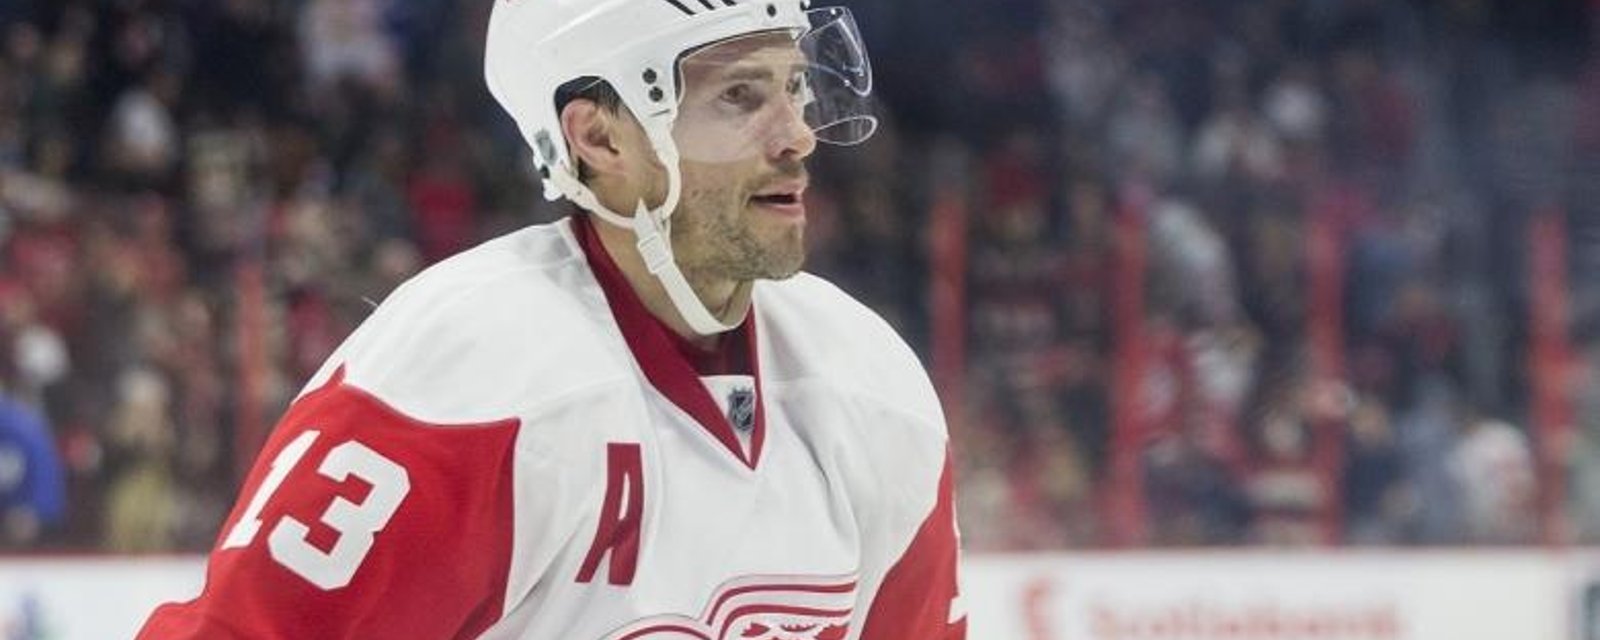 Datsyuk's most recent comments again appear to leave open possible return.